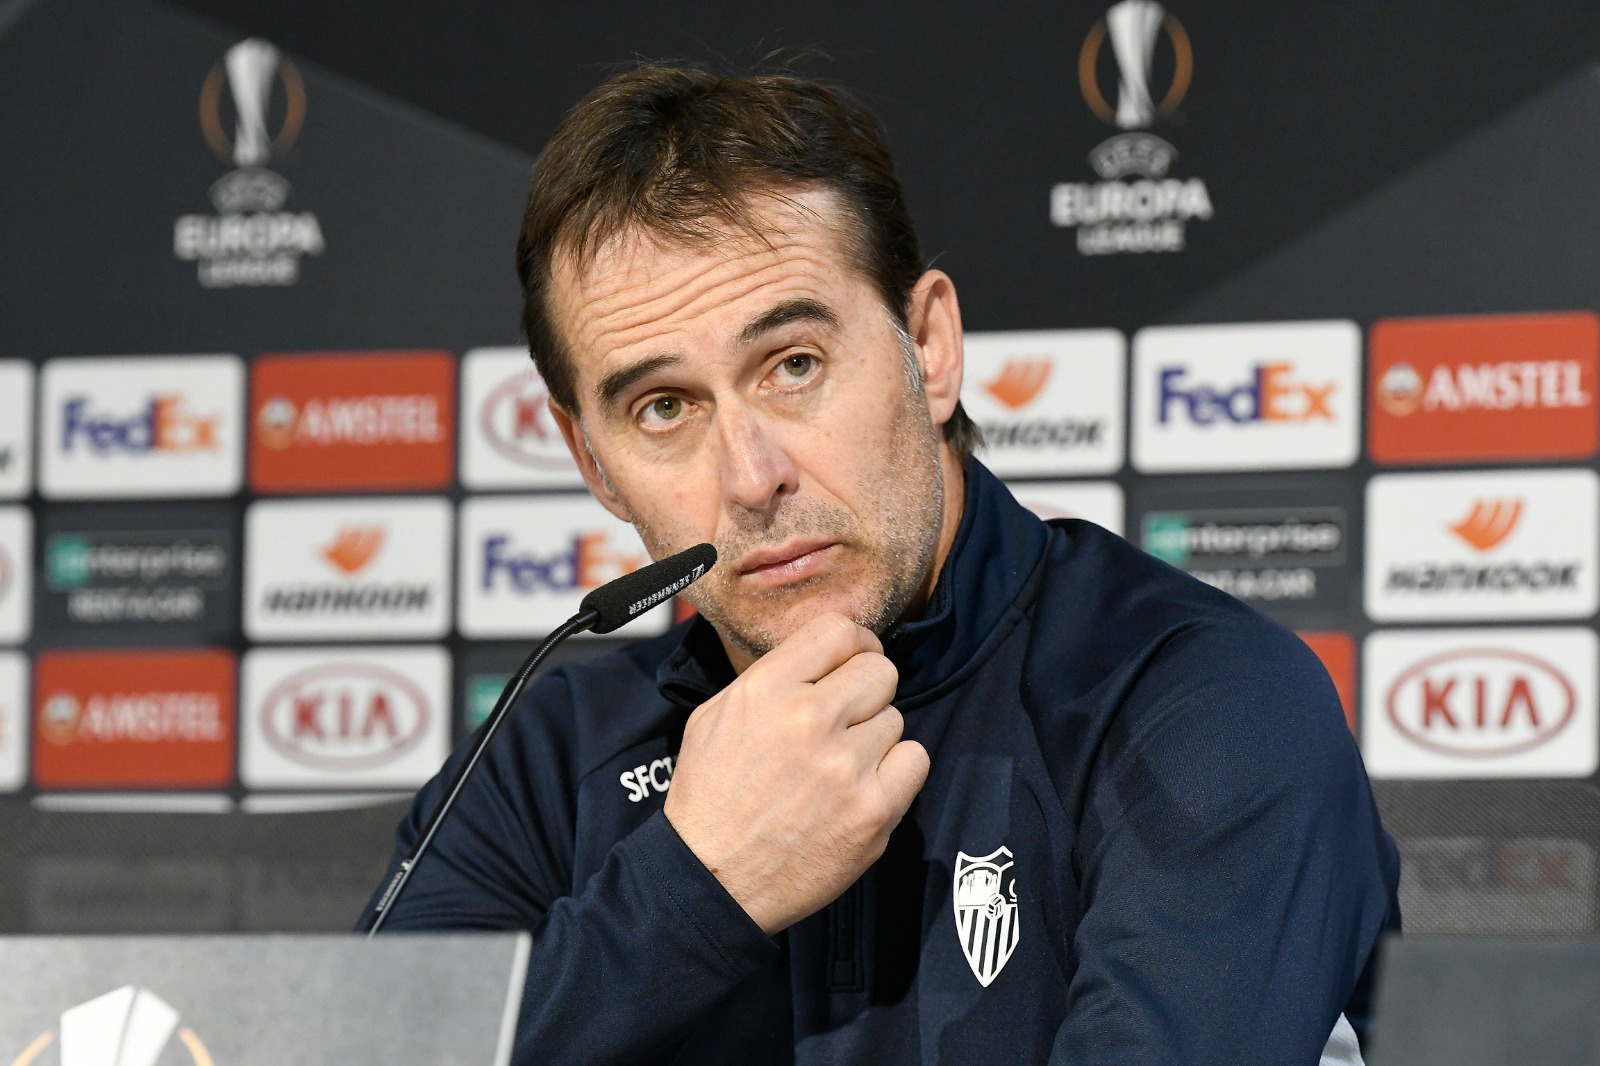 Julen Lopetegui during the press conference before CFR Cluj at home